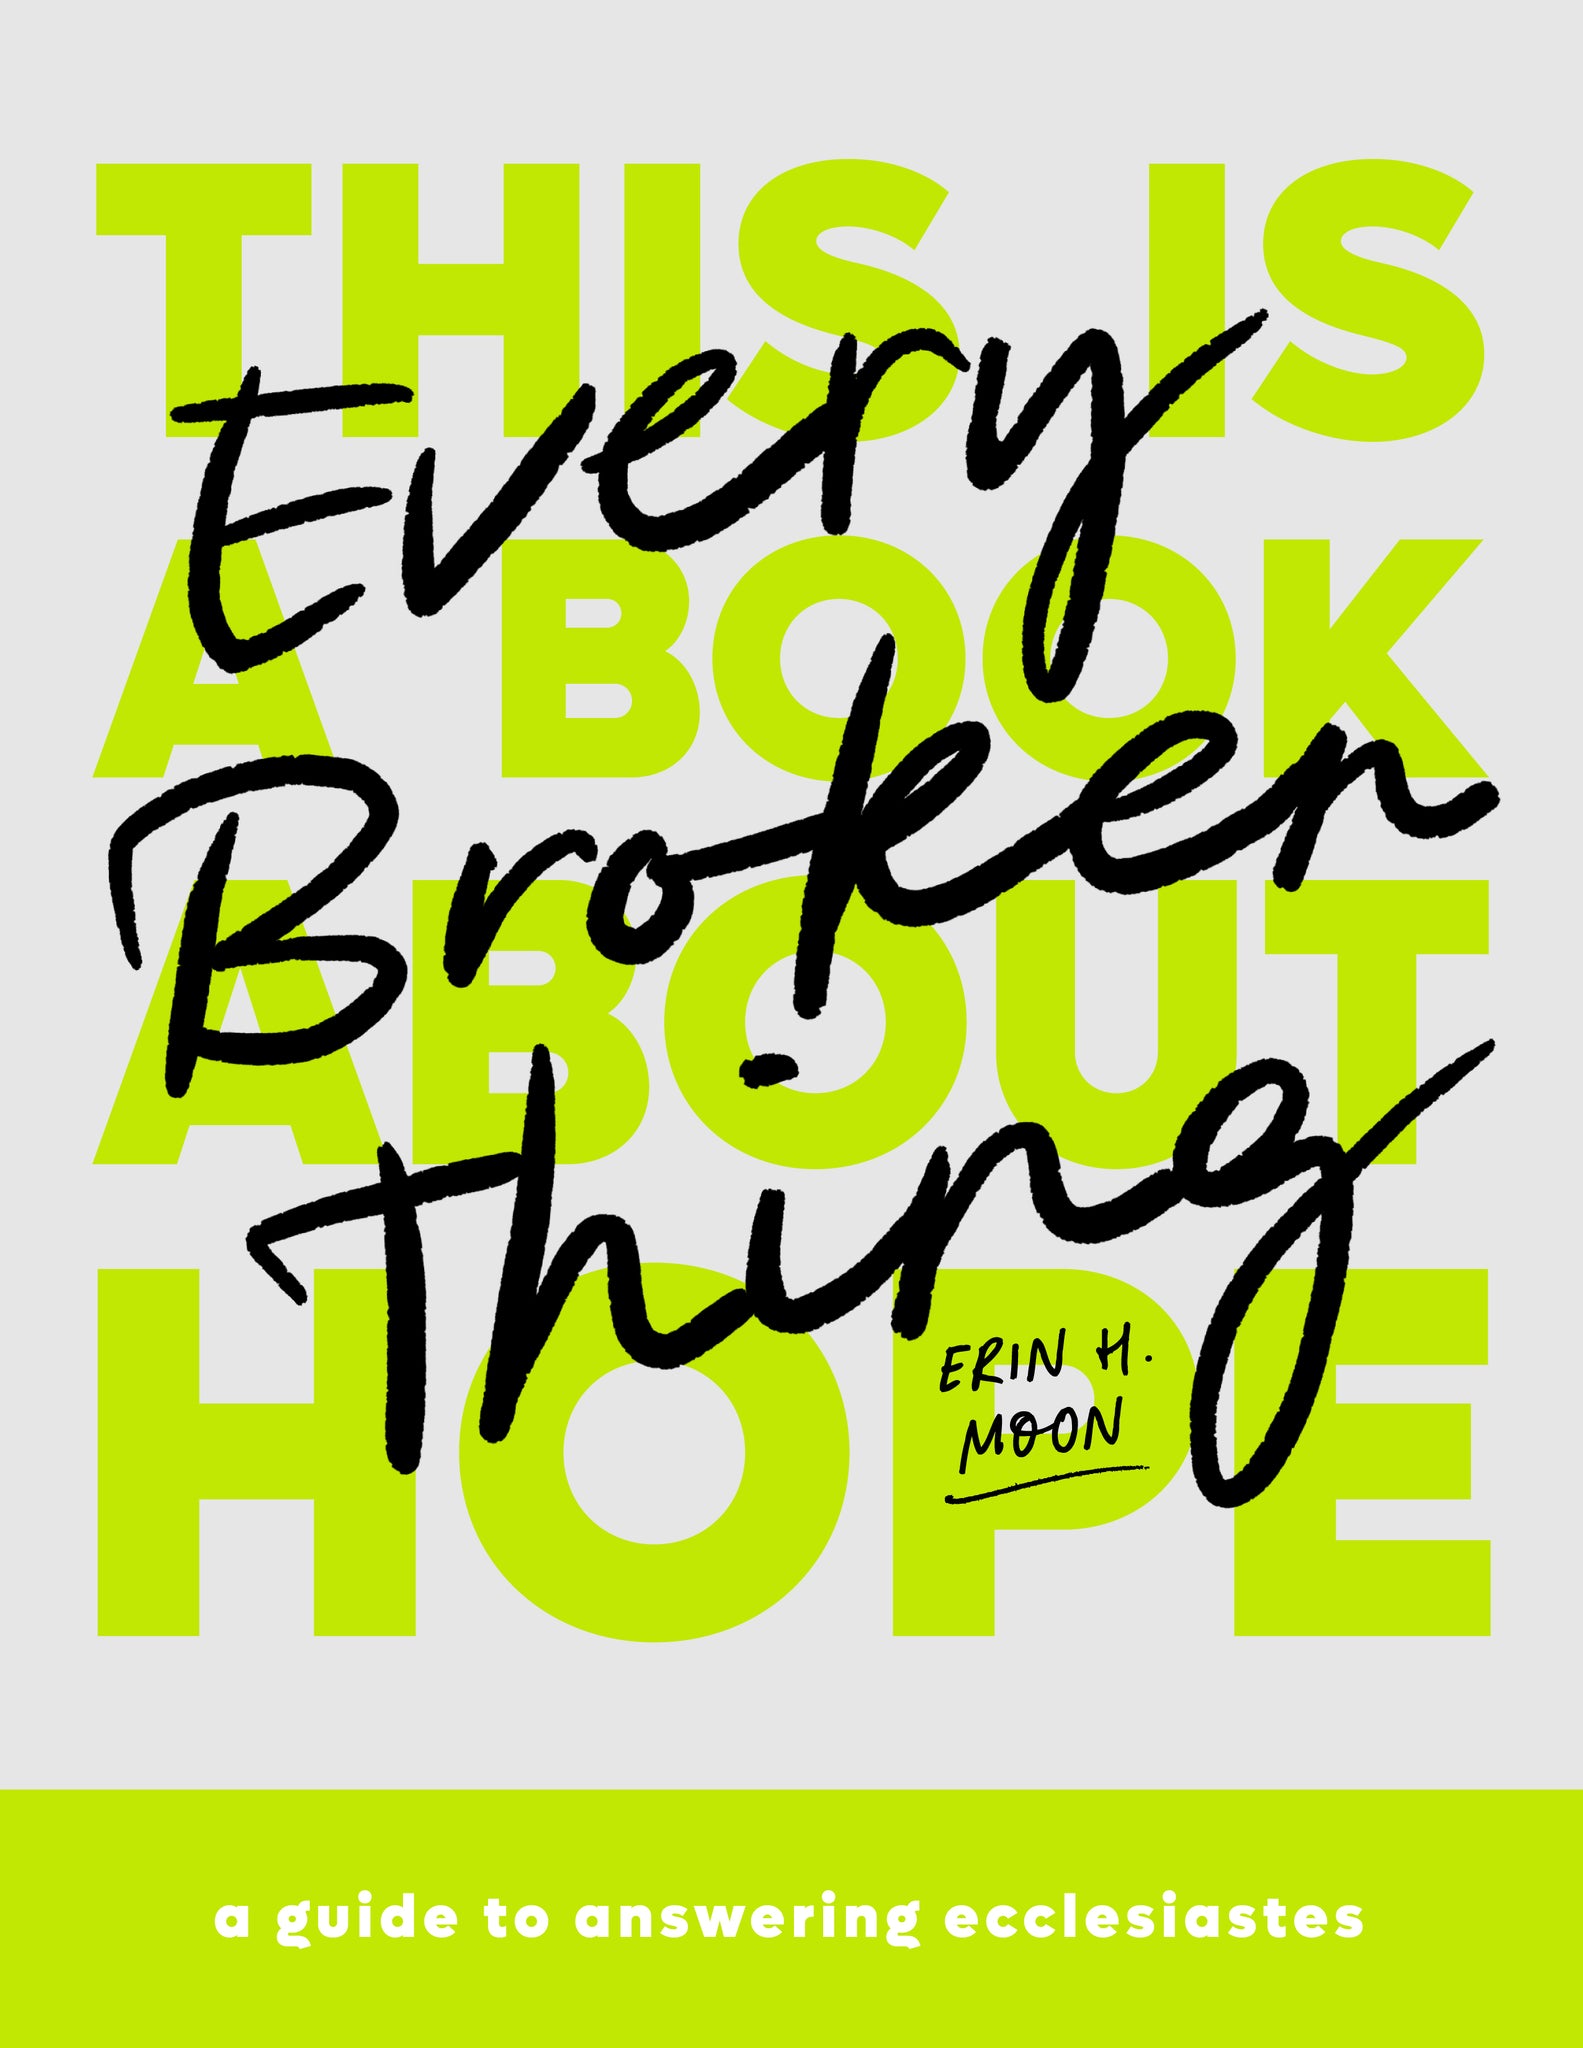 Every Broken Thing: A Guide to Answering Ecclesiastes